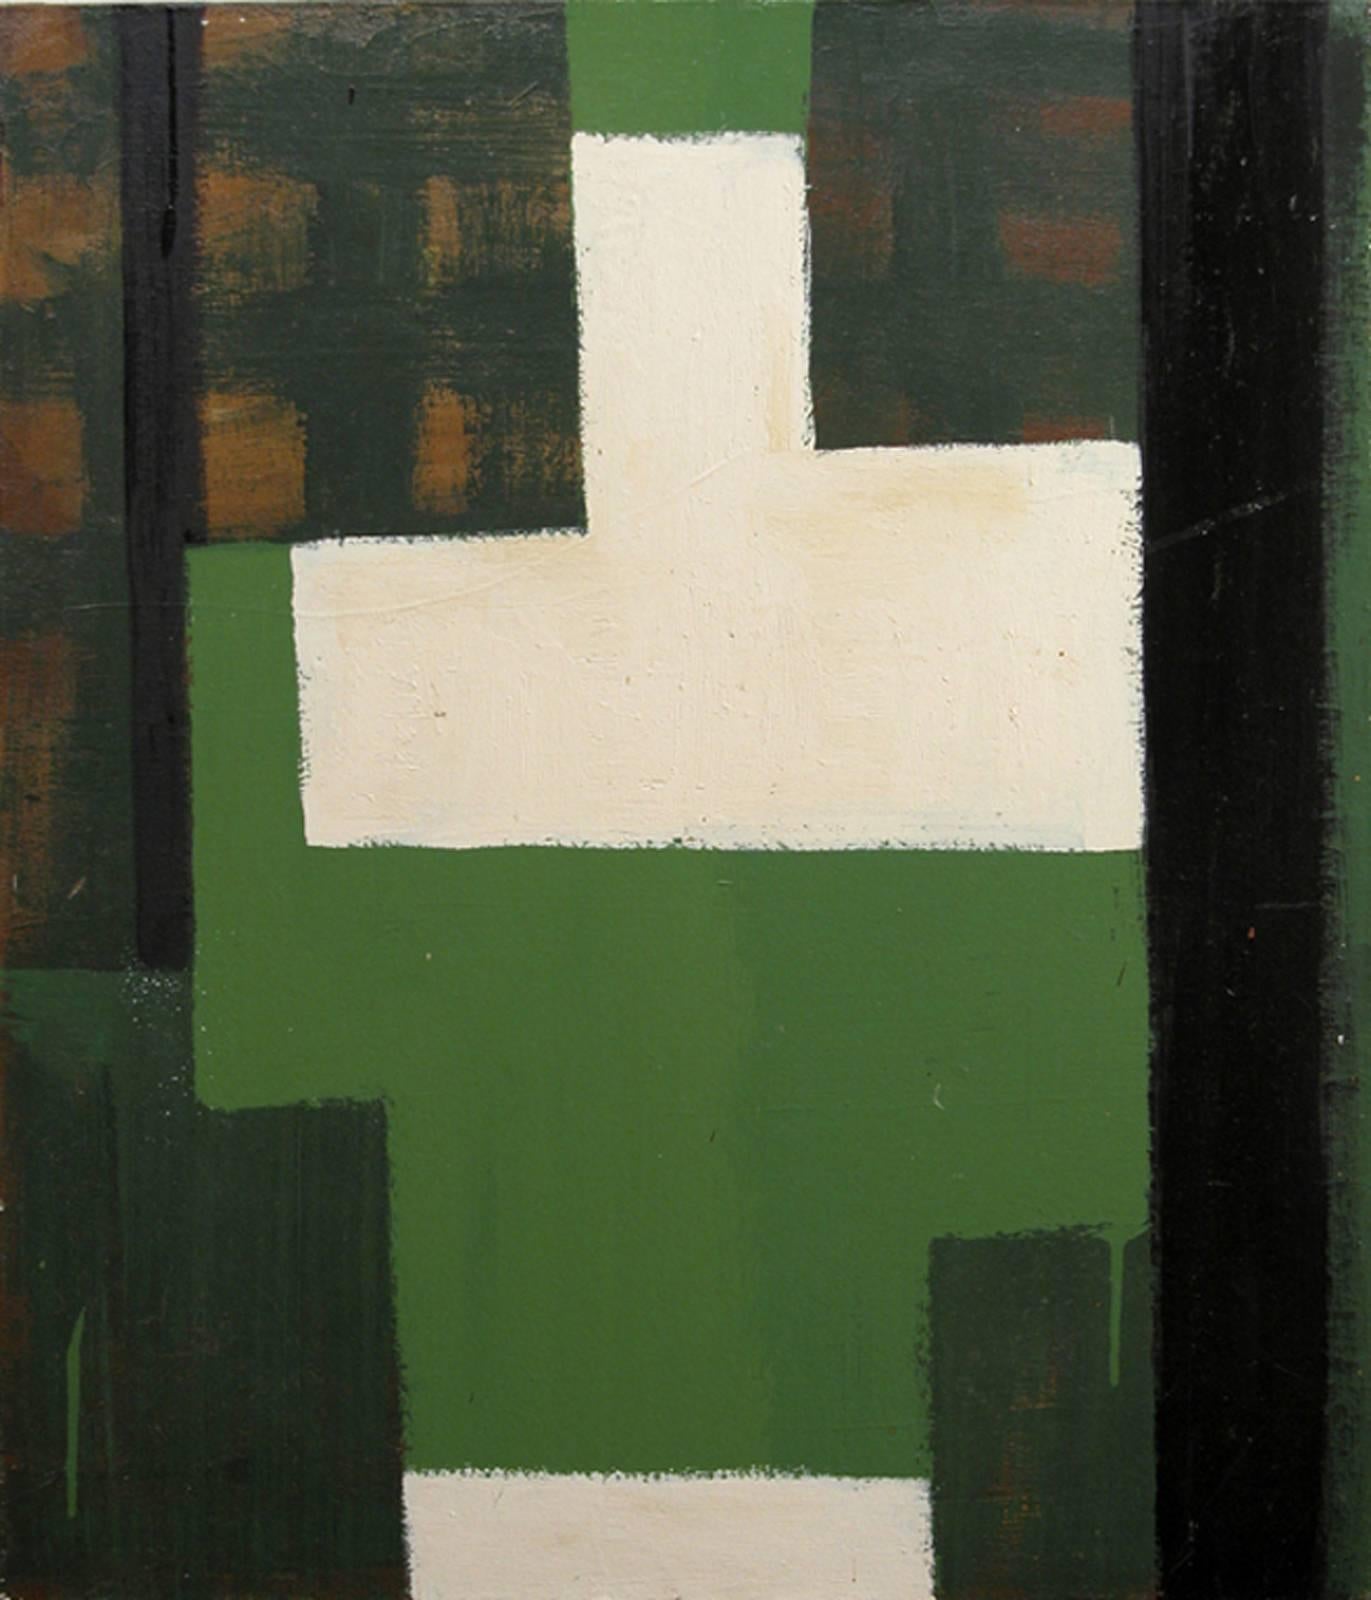 Christopher Engel Abstract Painting - Study (Green) (Abstract Expressionist Oil Painting in Green, Black and White)